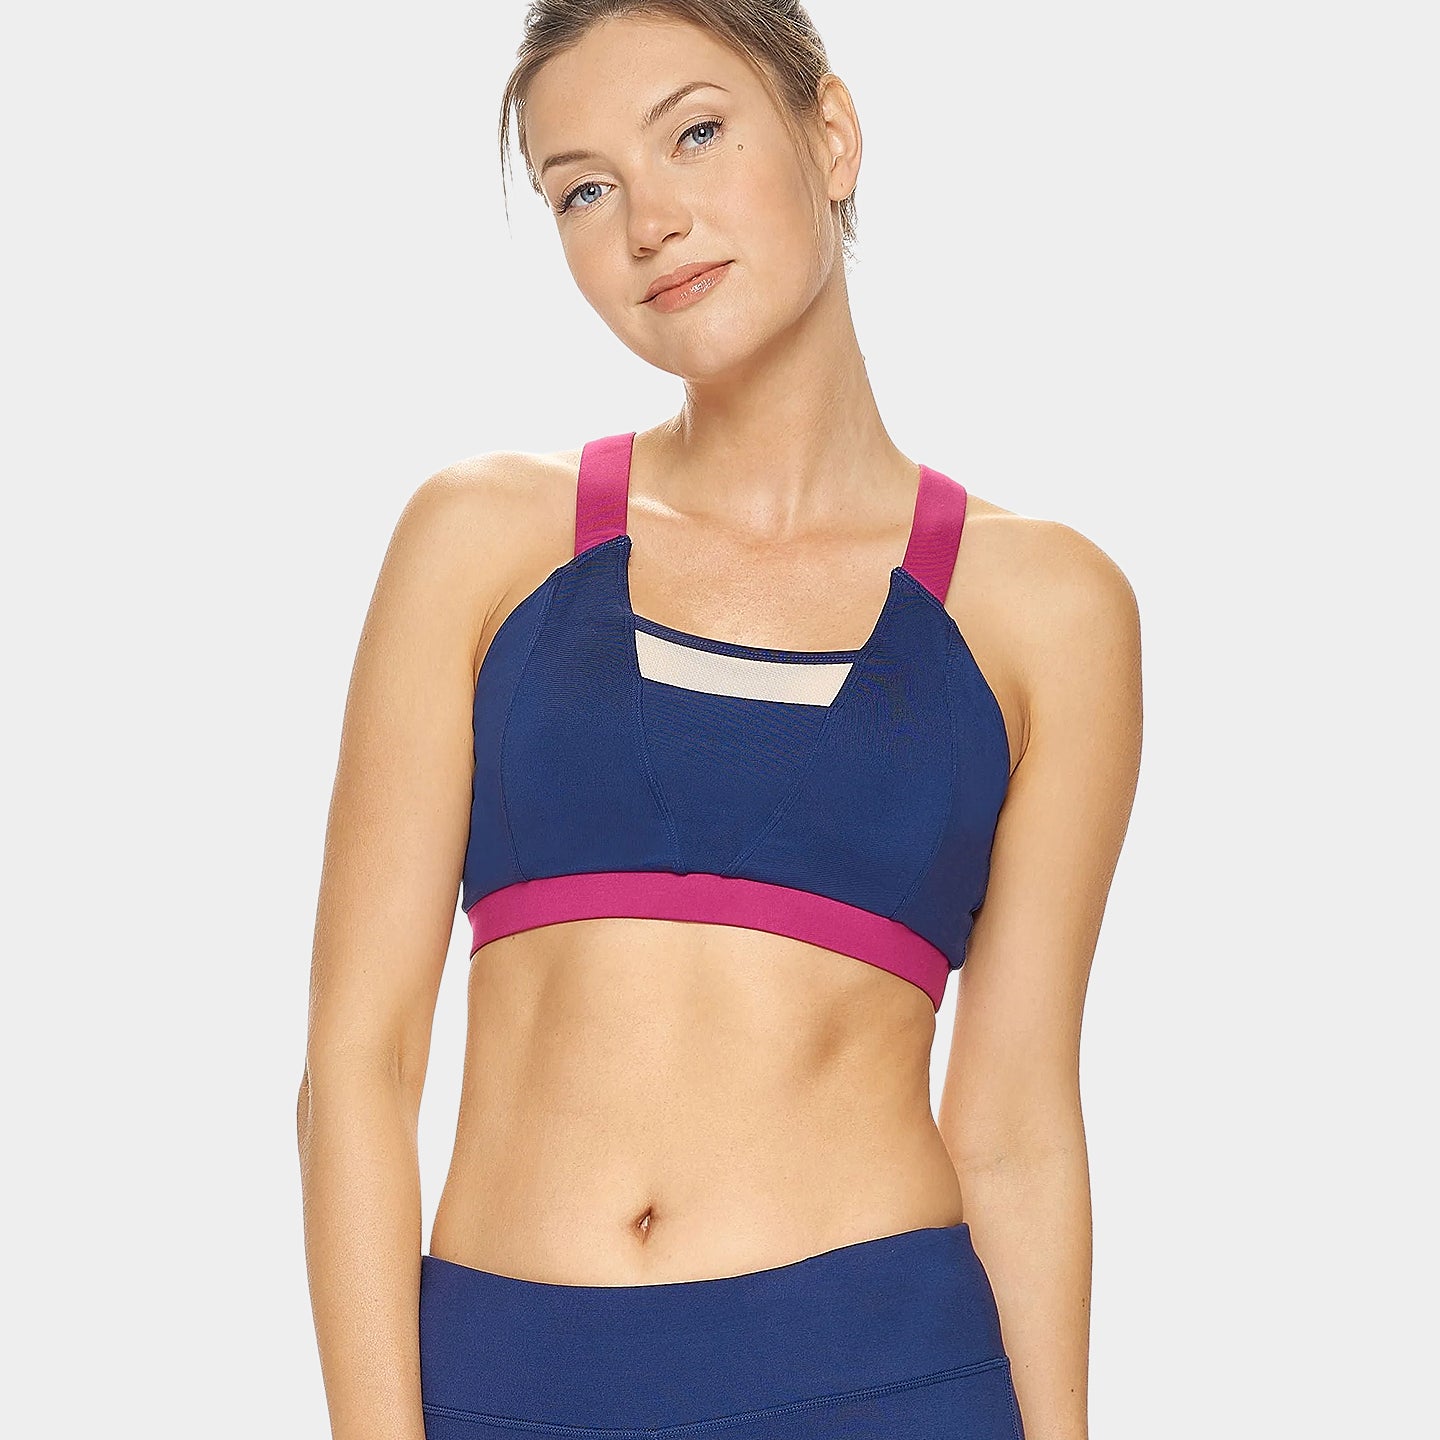 Expert Brand Women's Calypso Mesh Athletic Performance Sports Bra, M, Navy/Orchid A1